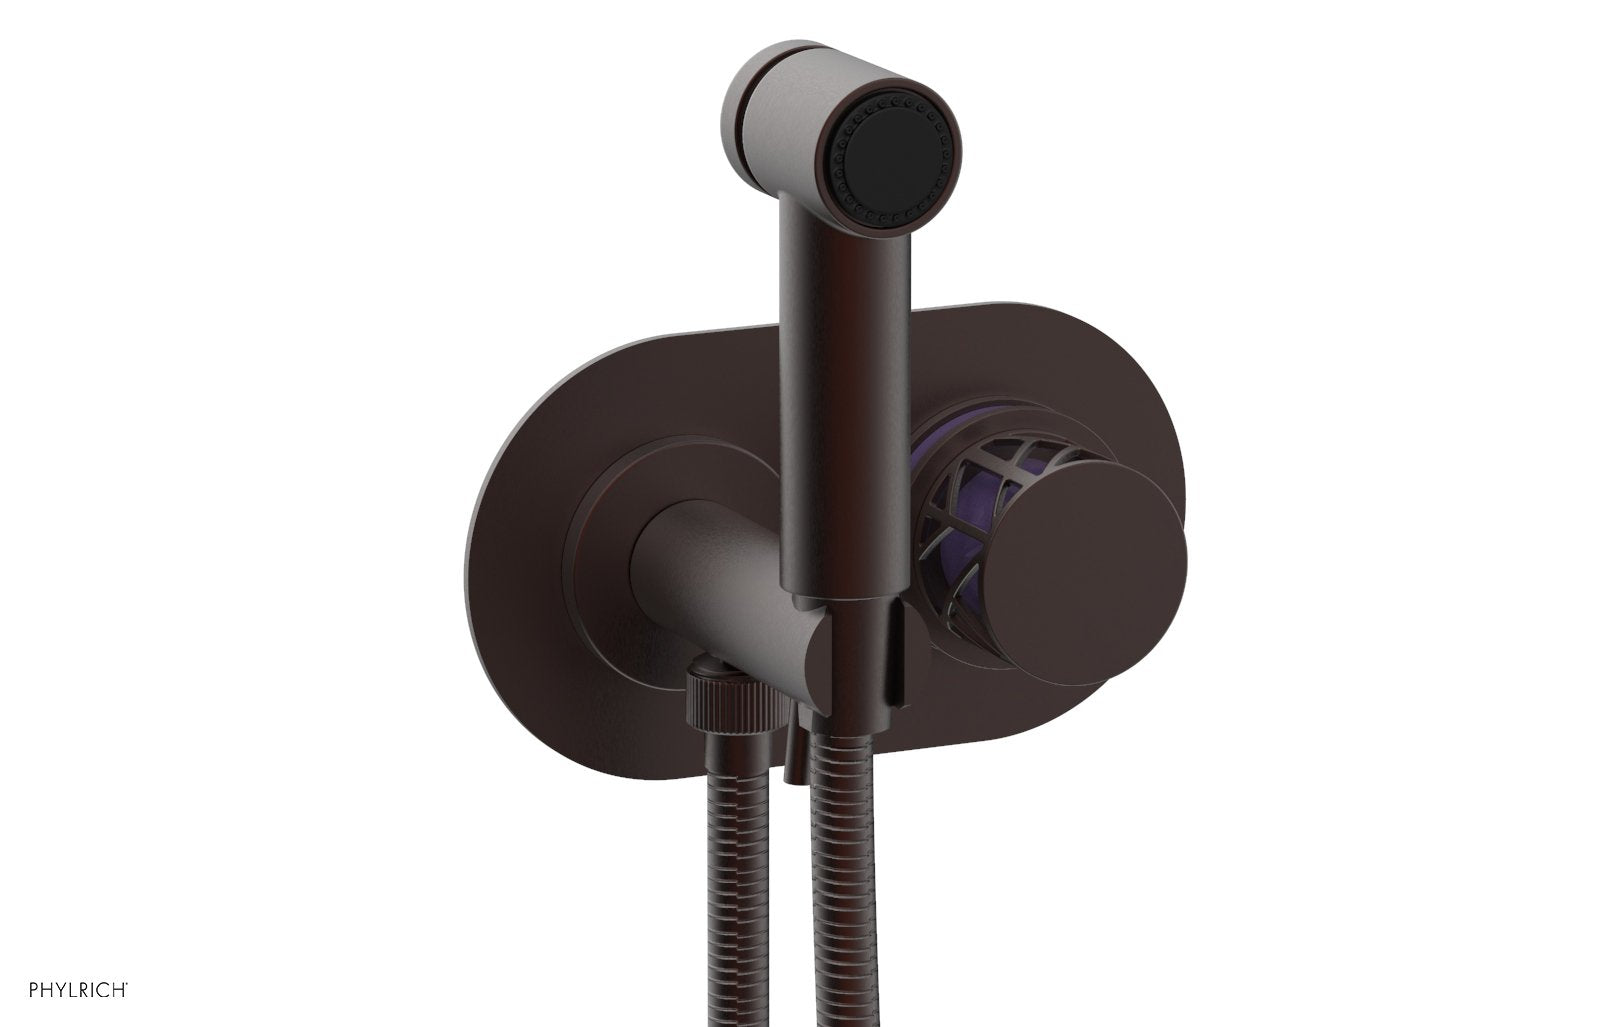 Phylrich JOLIE Wall Mounted Bidet, Round Handle with "Purple" Accents